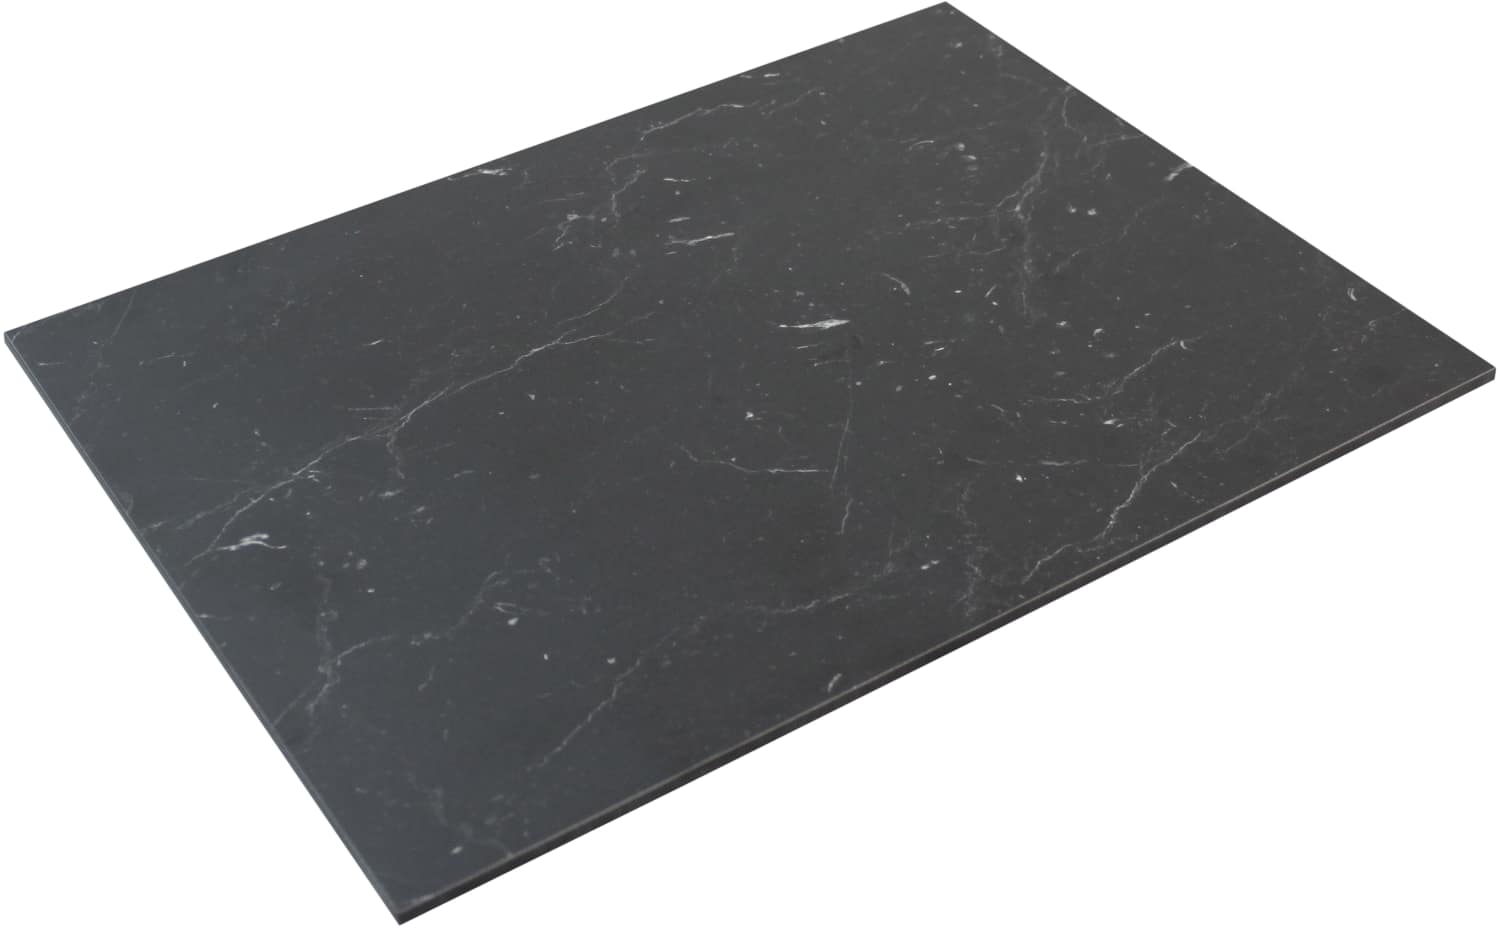 Display trays "marble" 